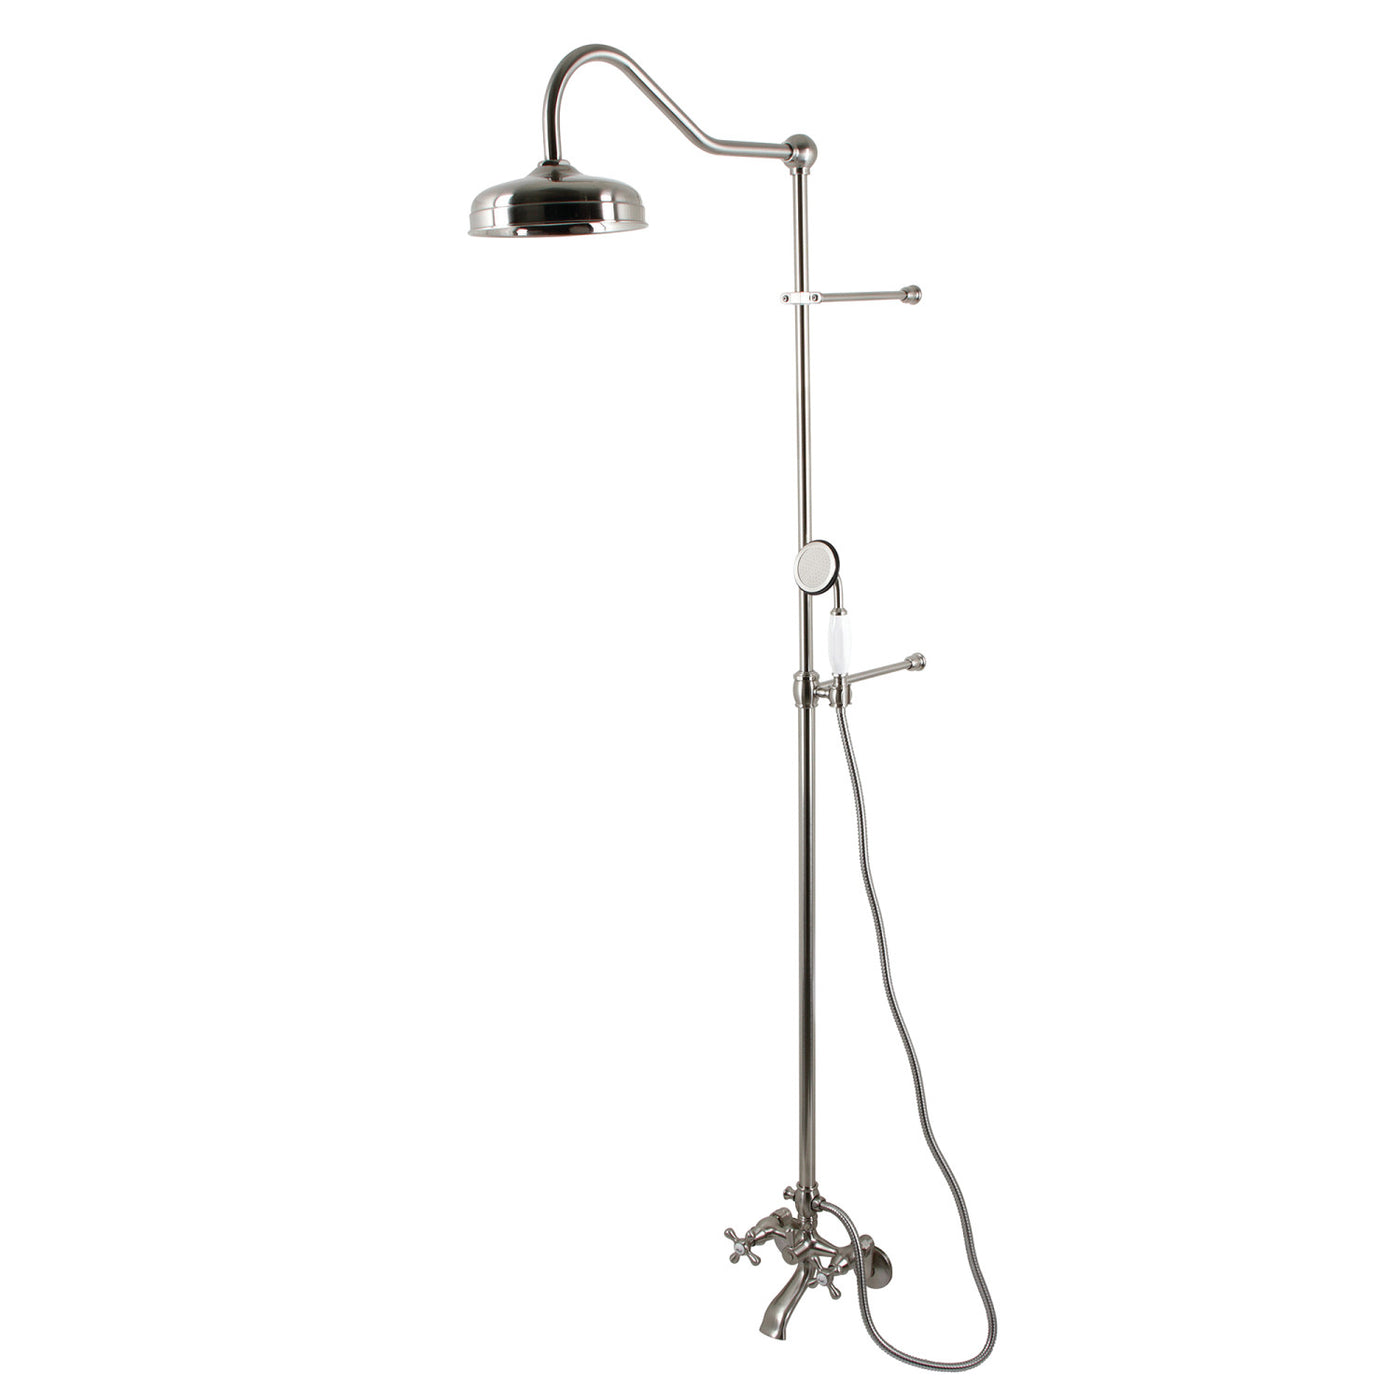 Elements of Design EDK2668 Clawfoot Tub Faucet Package with Shower Combo, Brushed Nickel